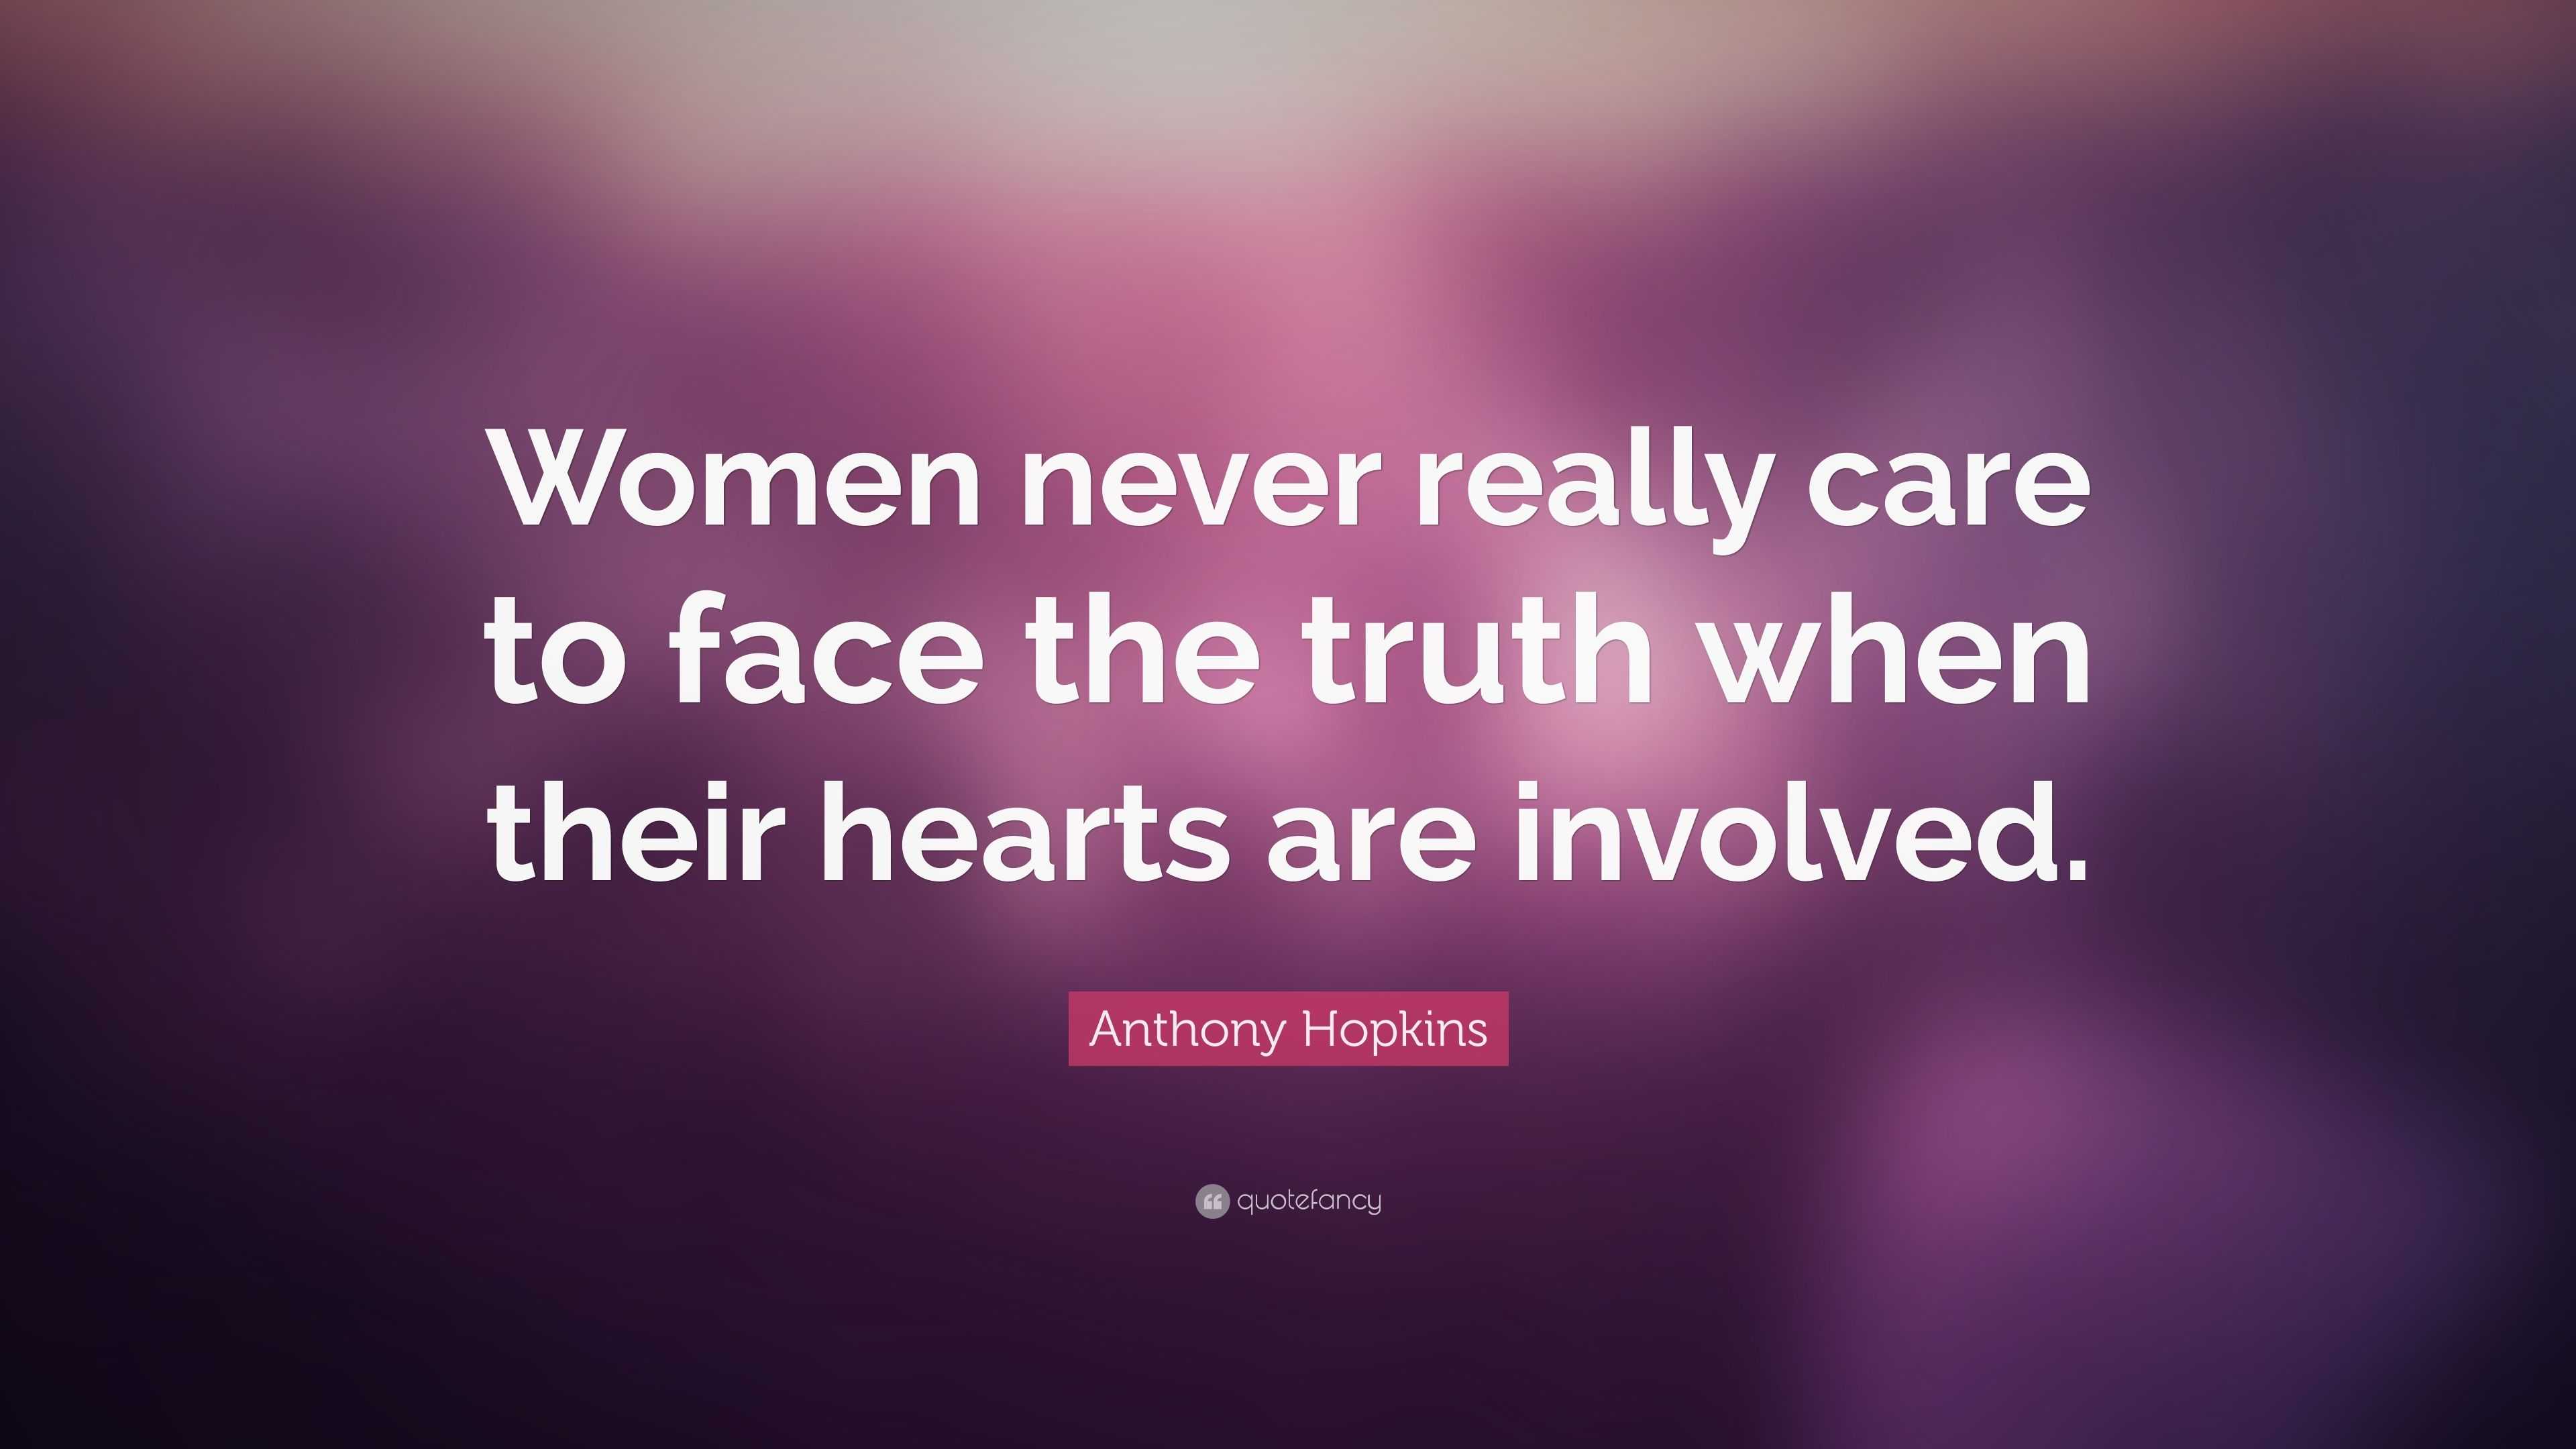 Anthony Hopkins Quote Women Never Really Care To Face The Truth When Their Hearts Are Involved 7 Wallpapers Quotefancy